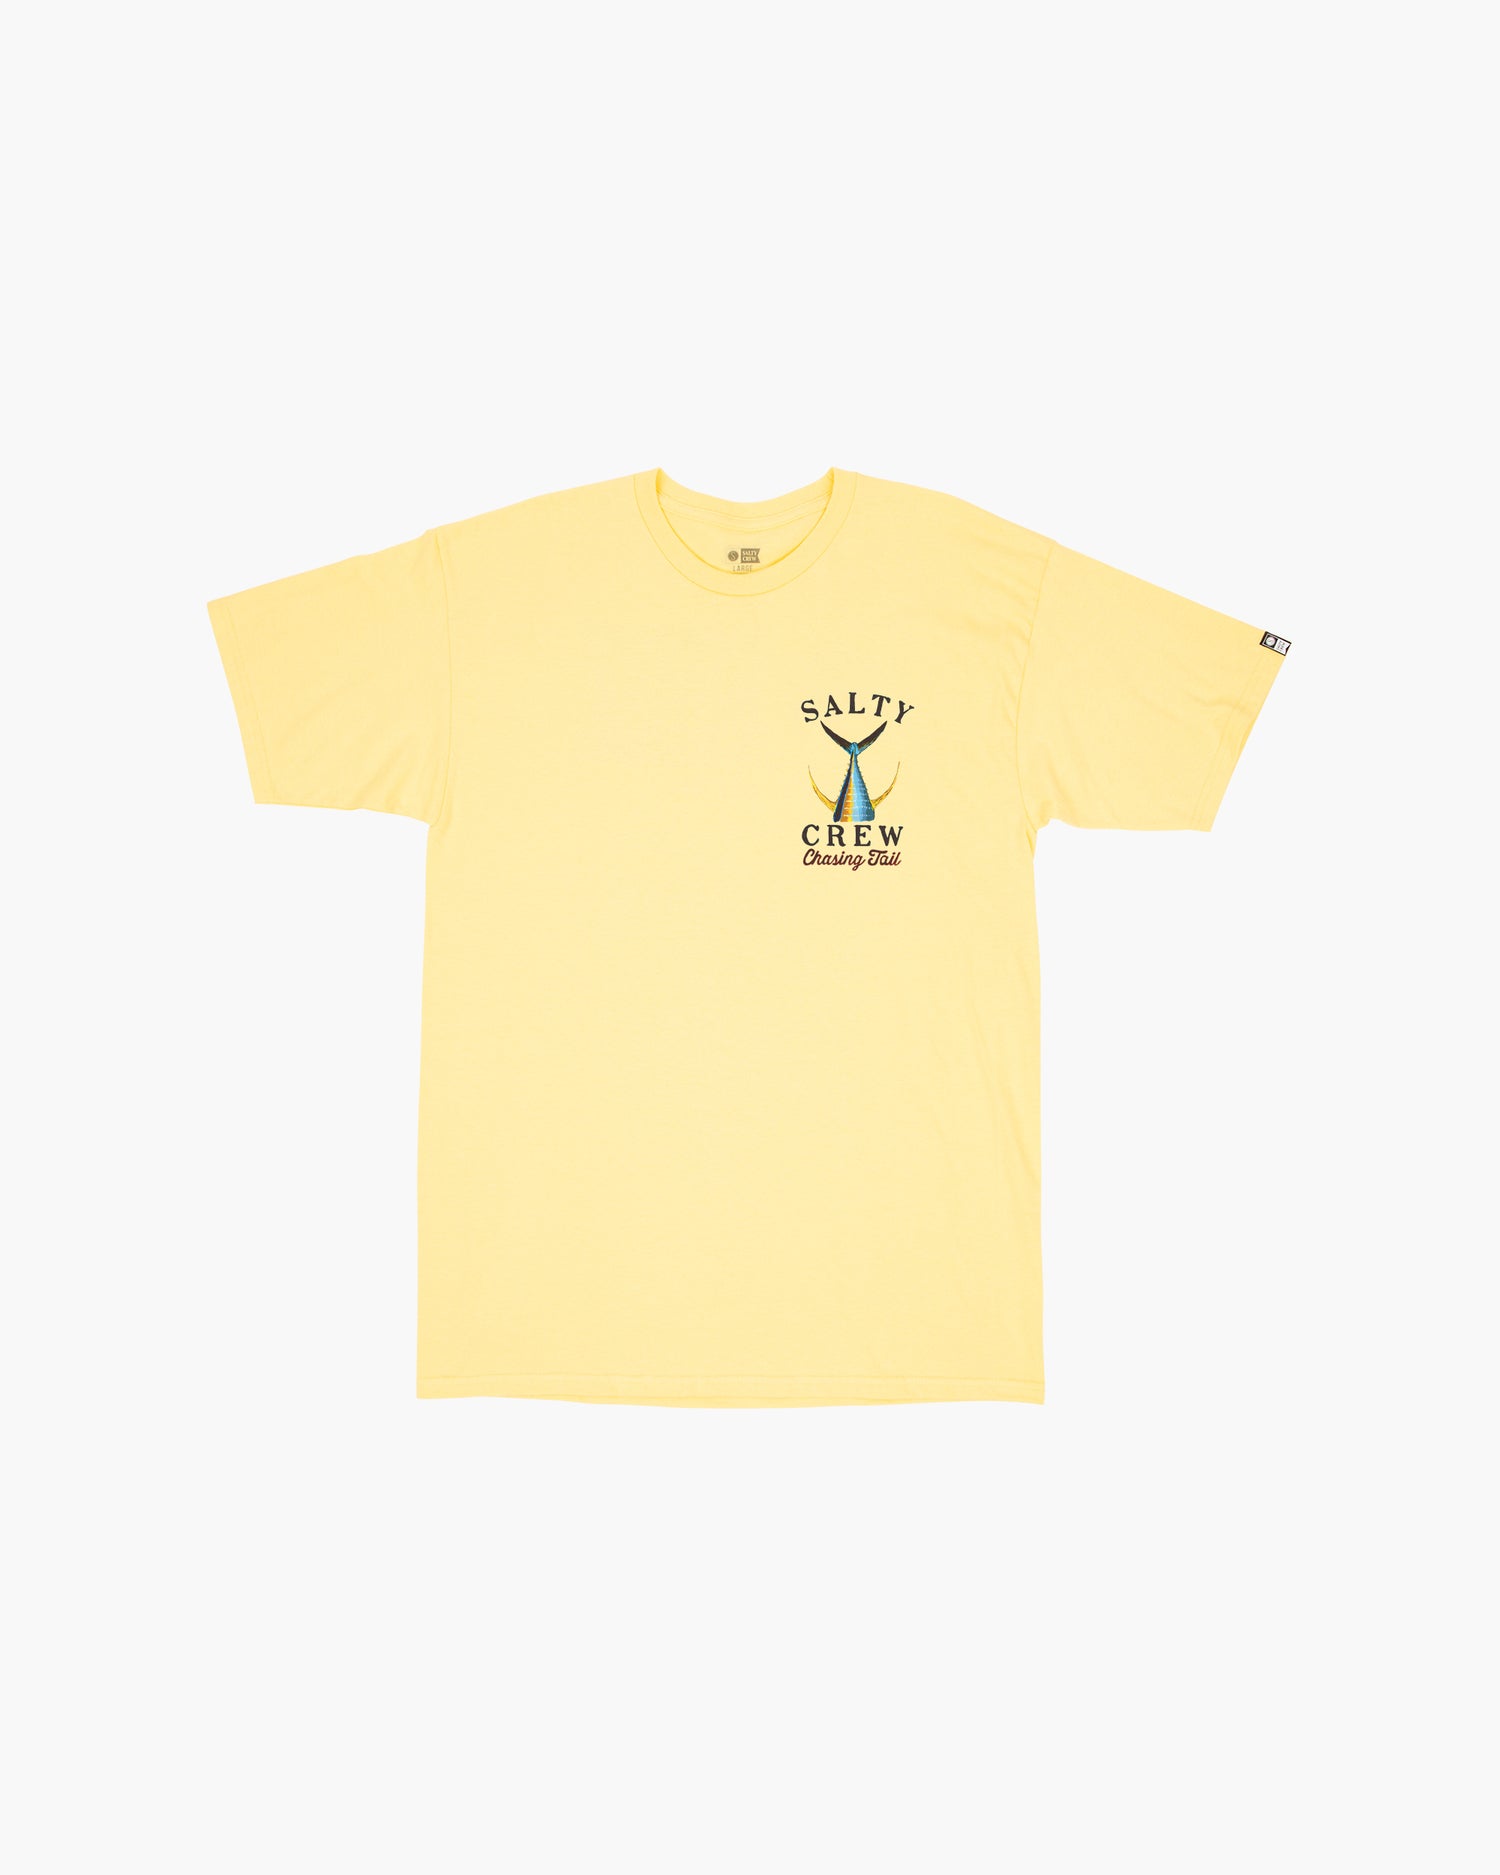 Off body front of Tailed Banana S/S Standard Tee